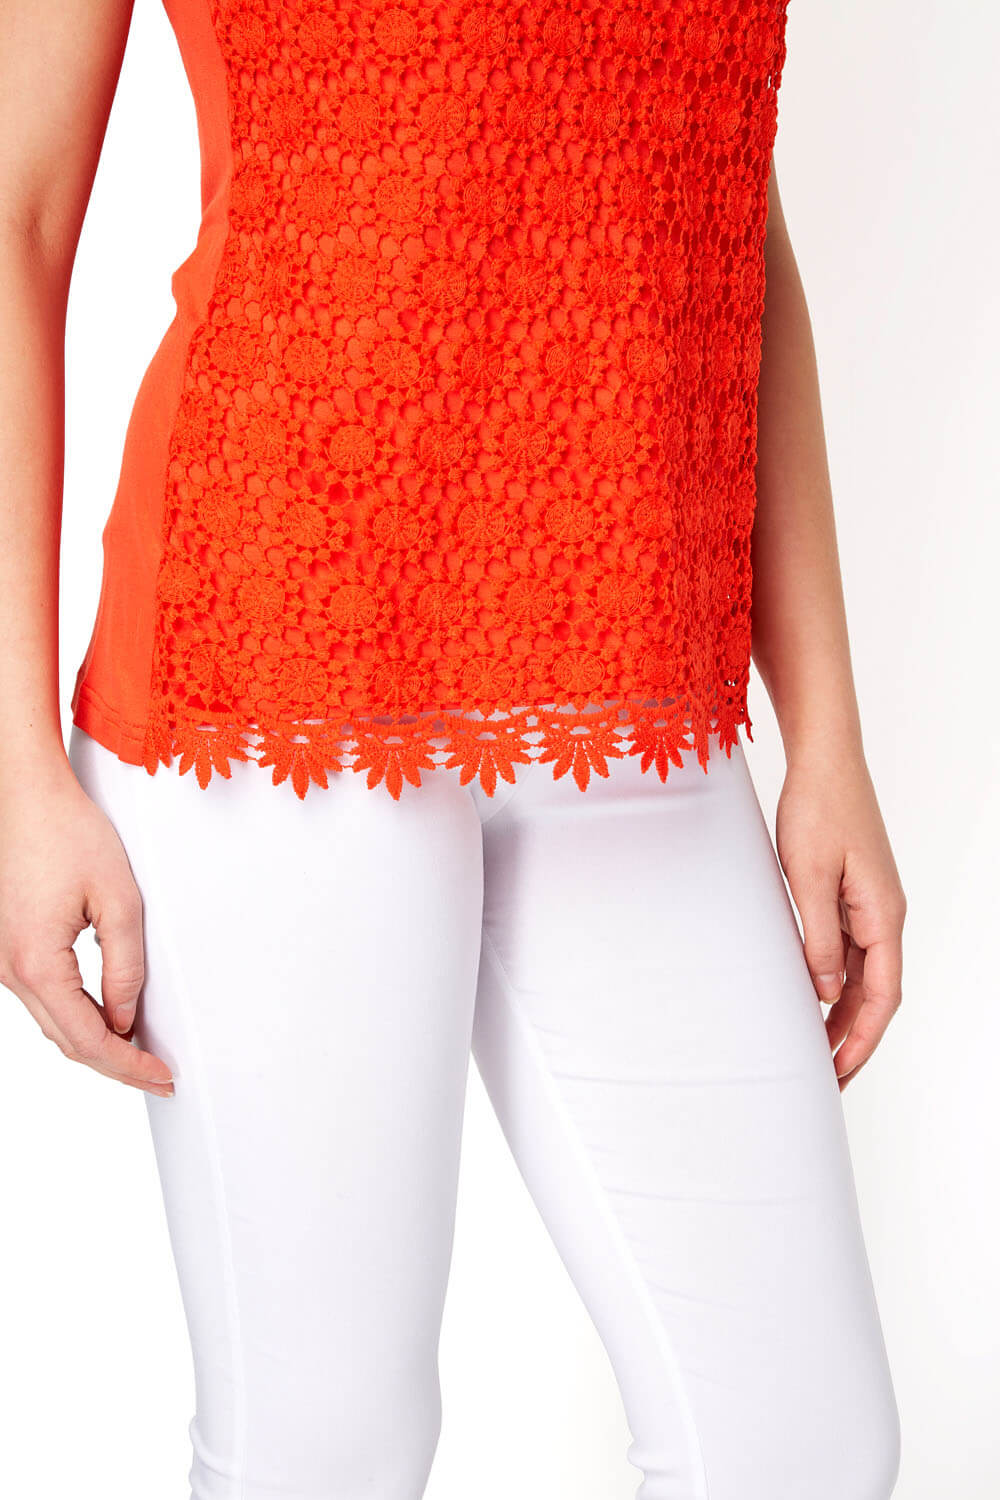 ORANGE Lace Jersey Top, Image 4 of 9